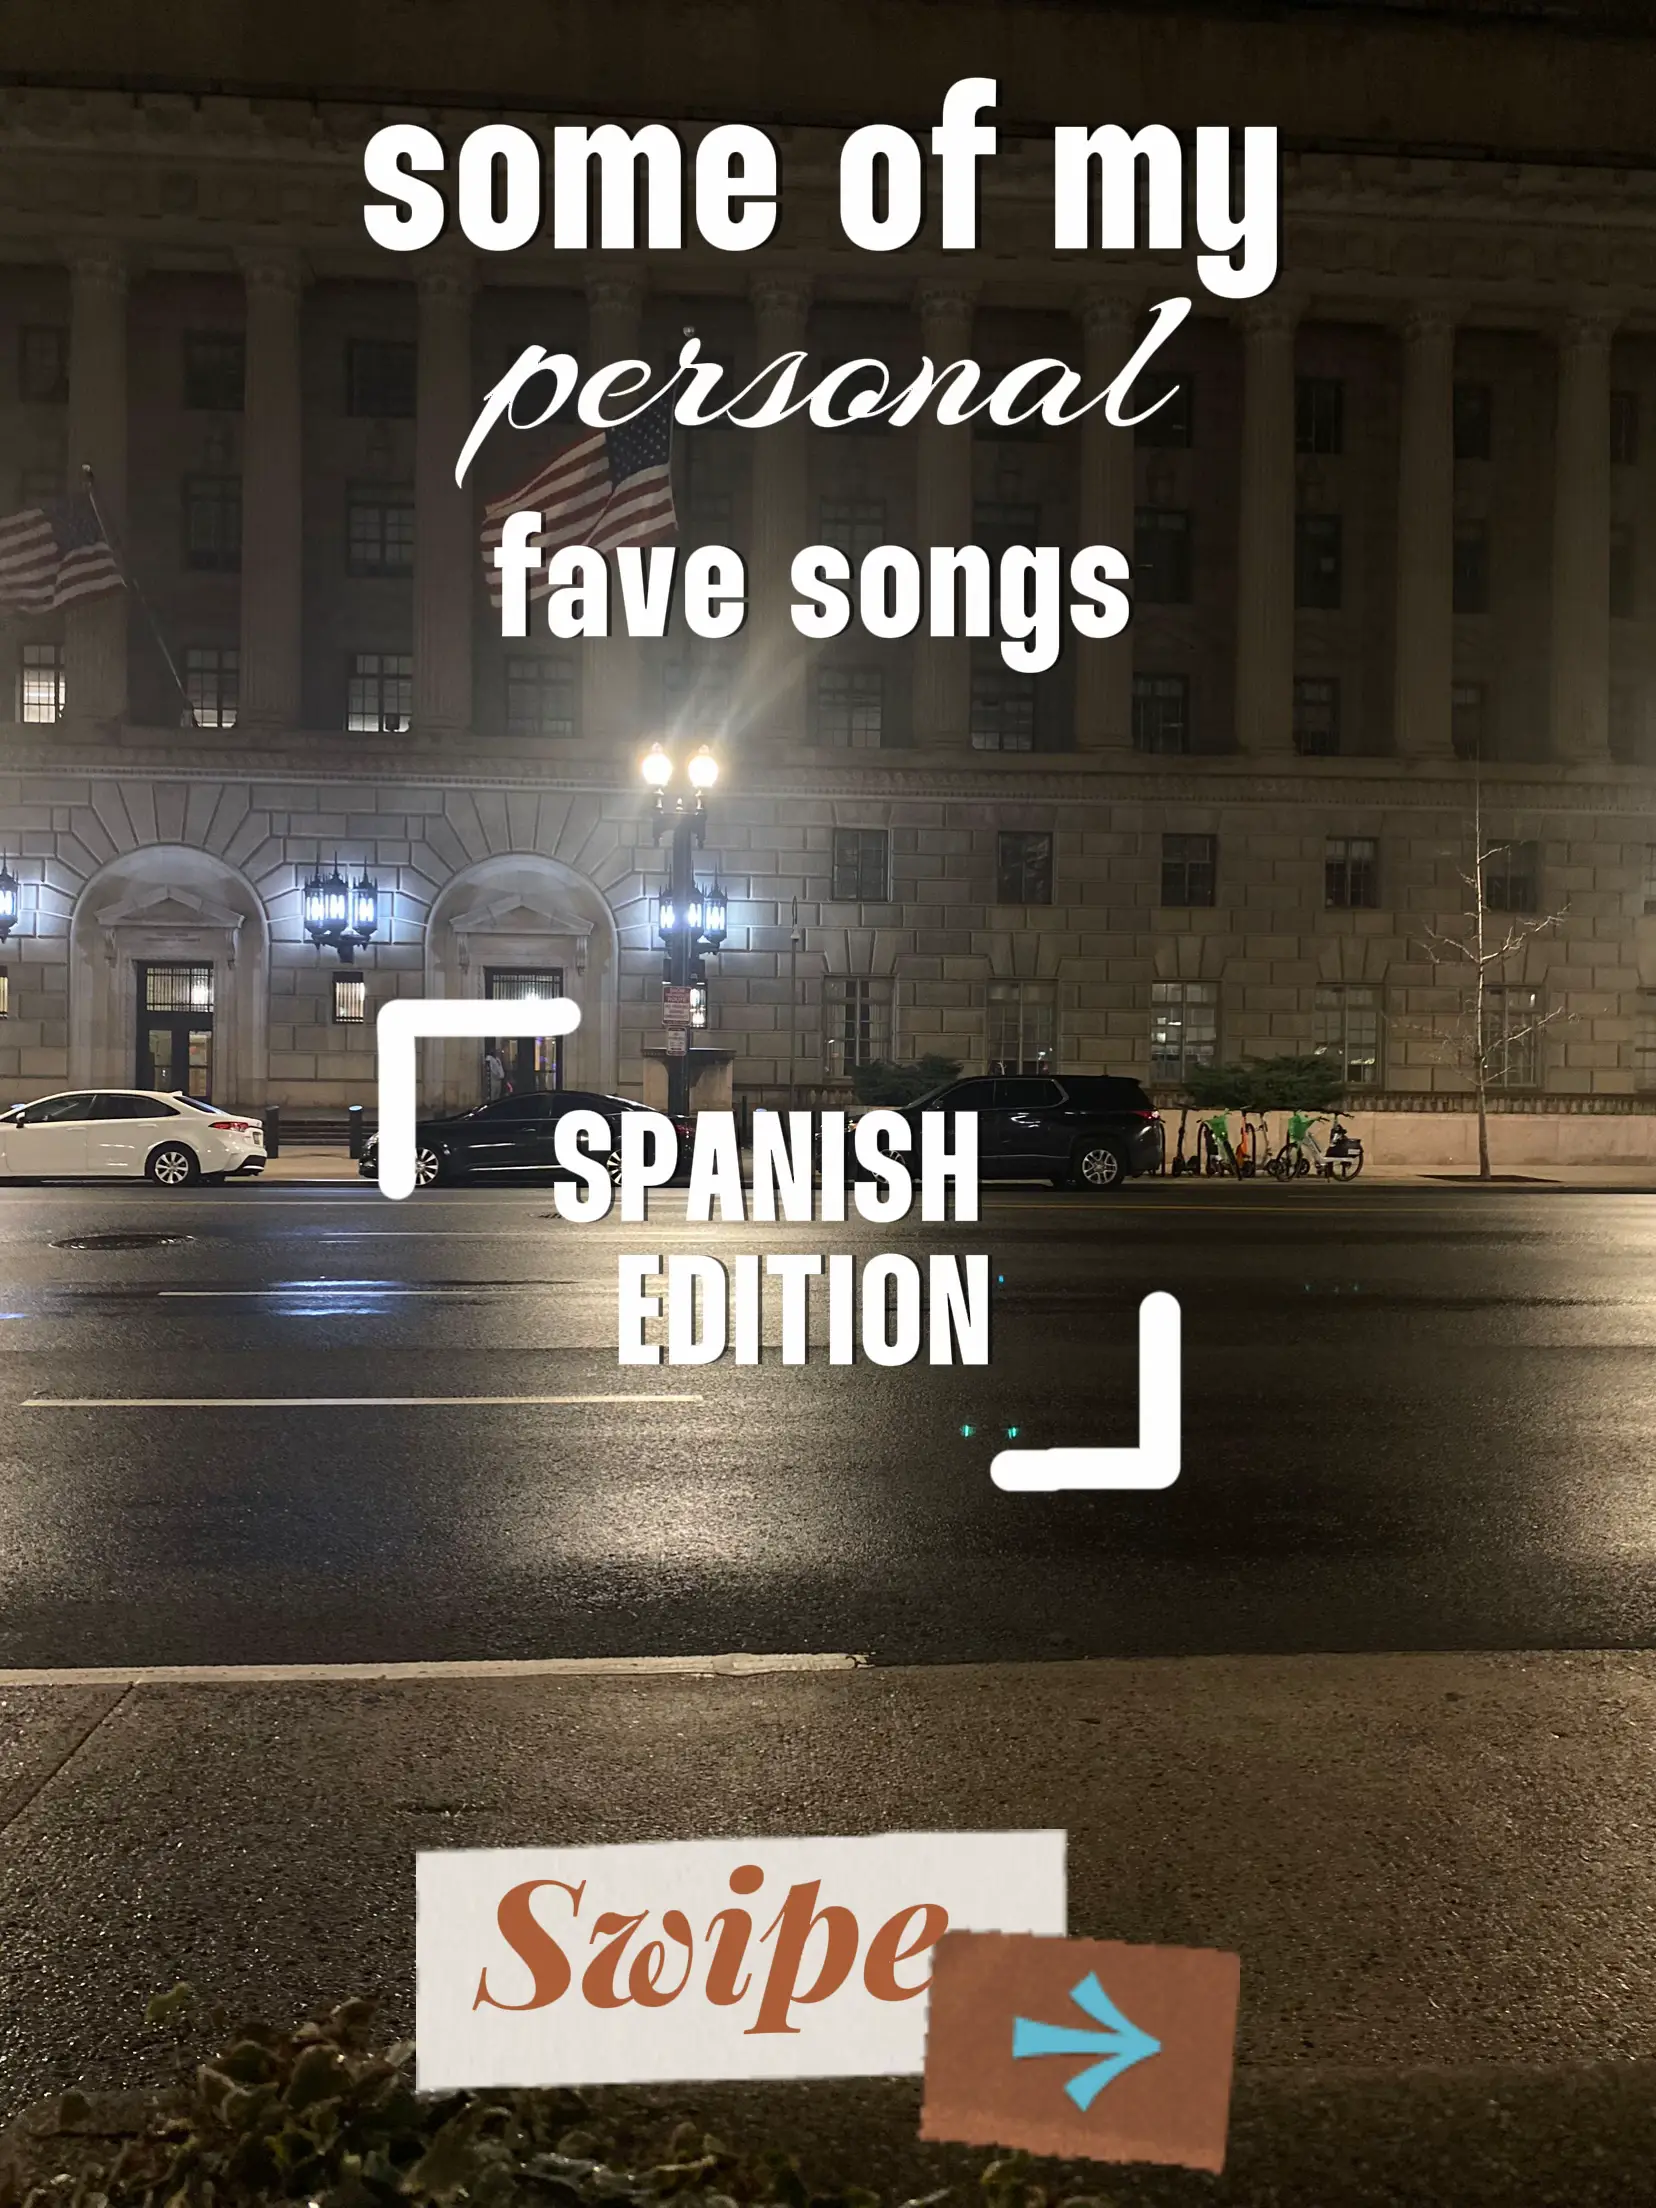 Spanish Songs to Post Yourself on Insta - Lemon8 Search